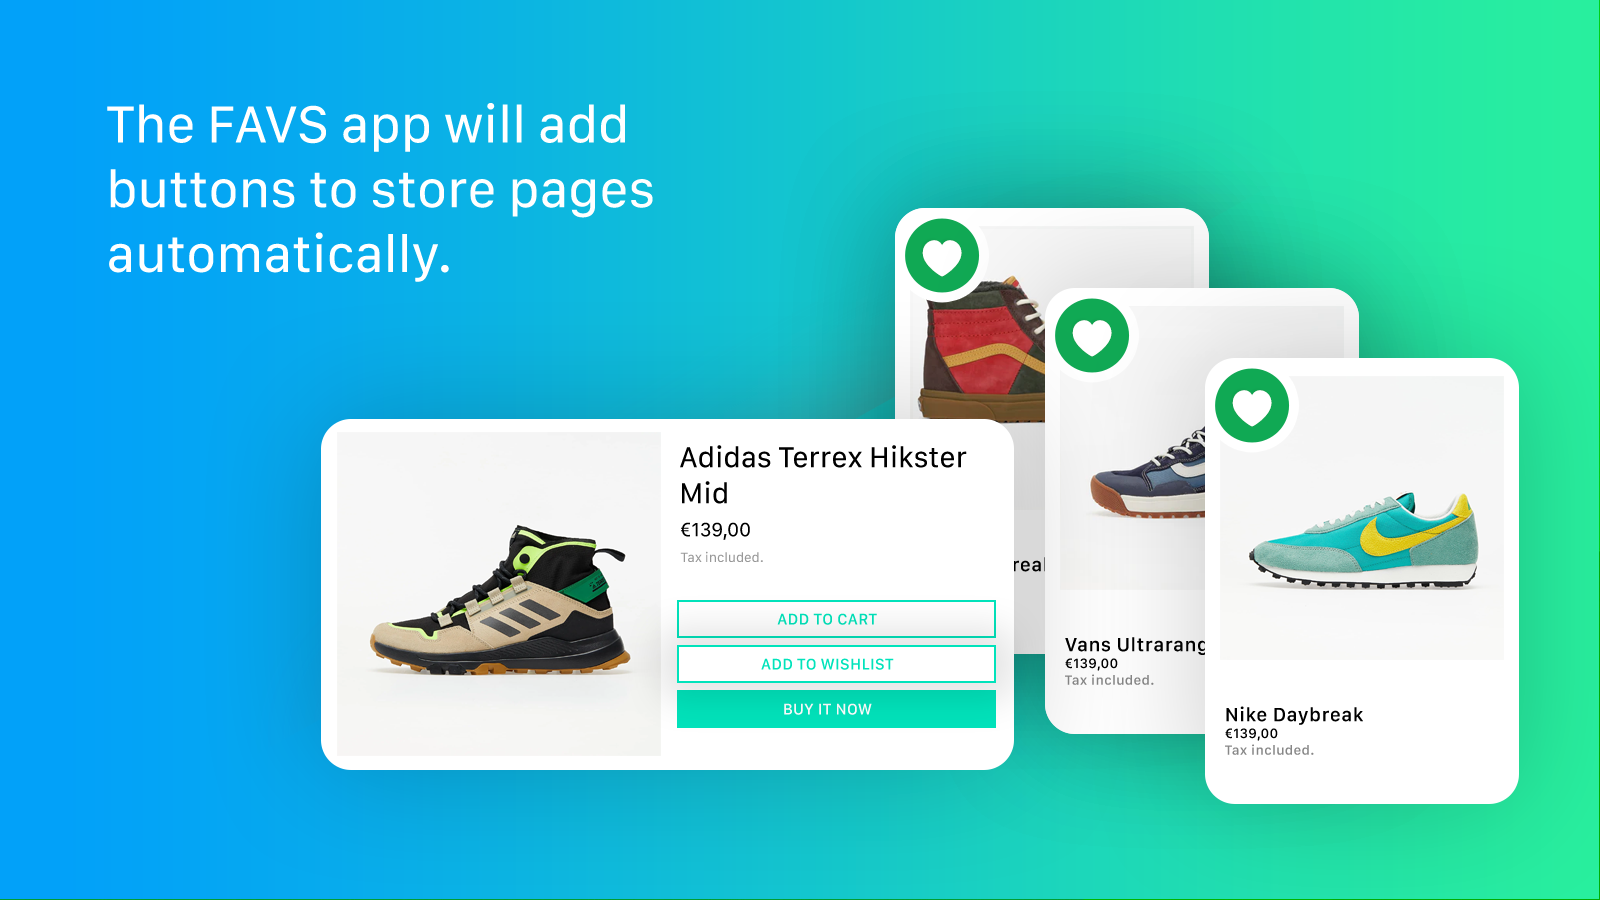 The app will add buttons to all pages automatically.